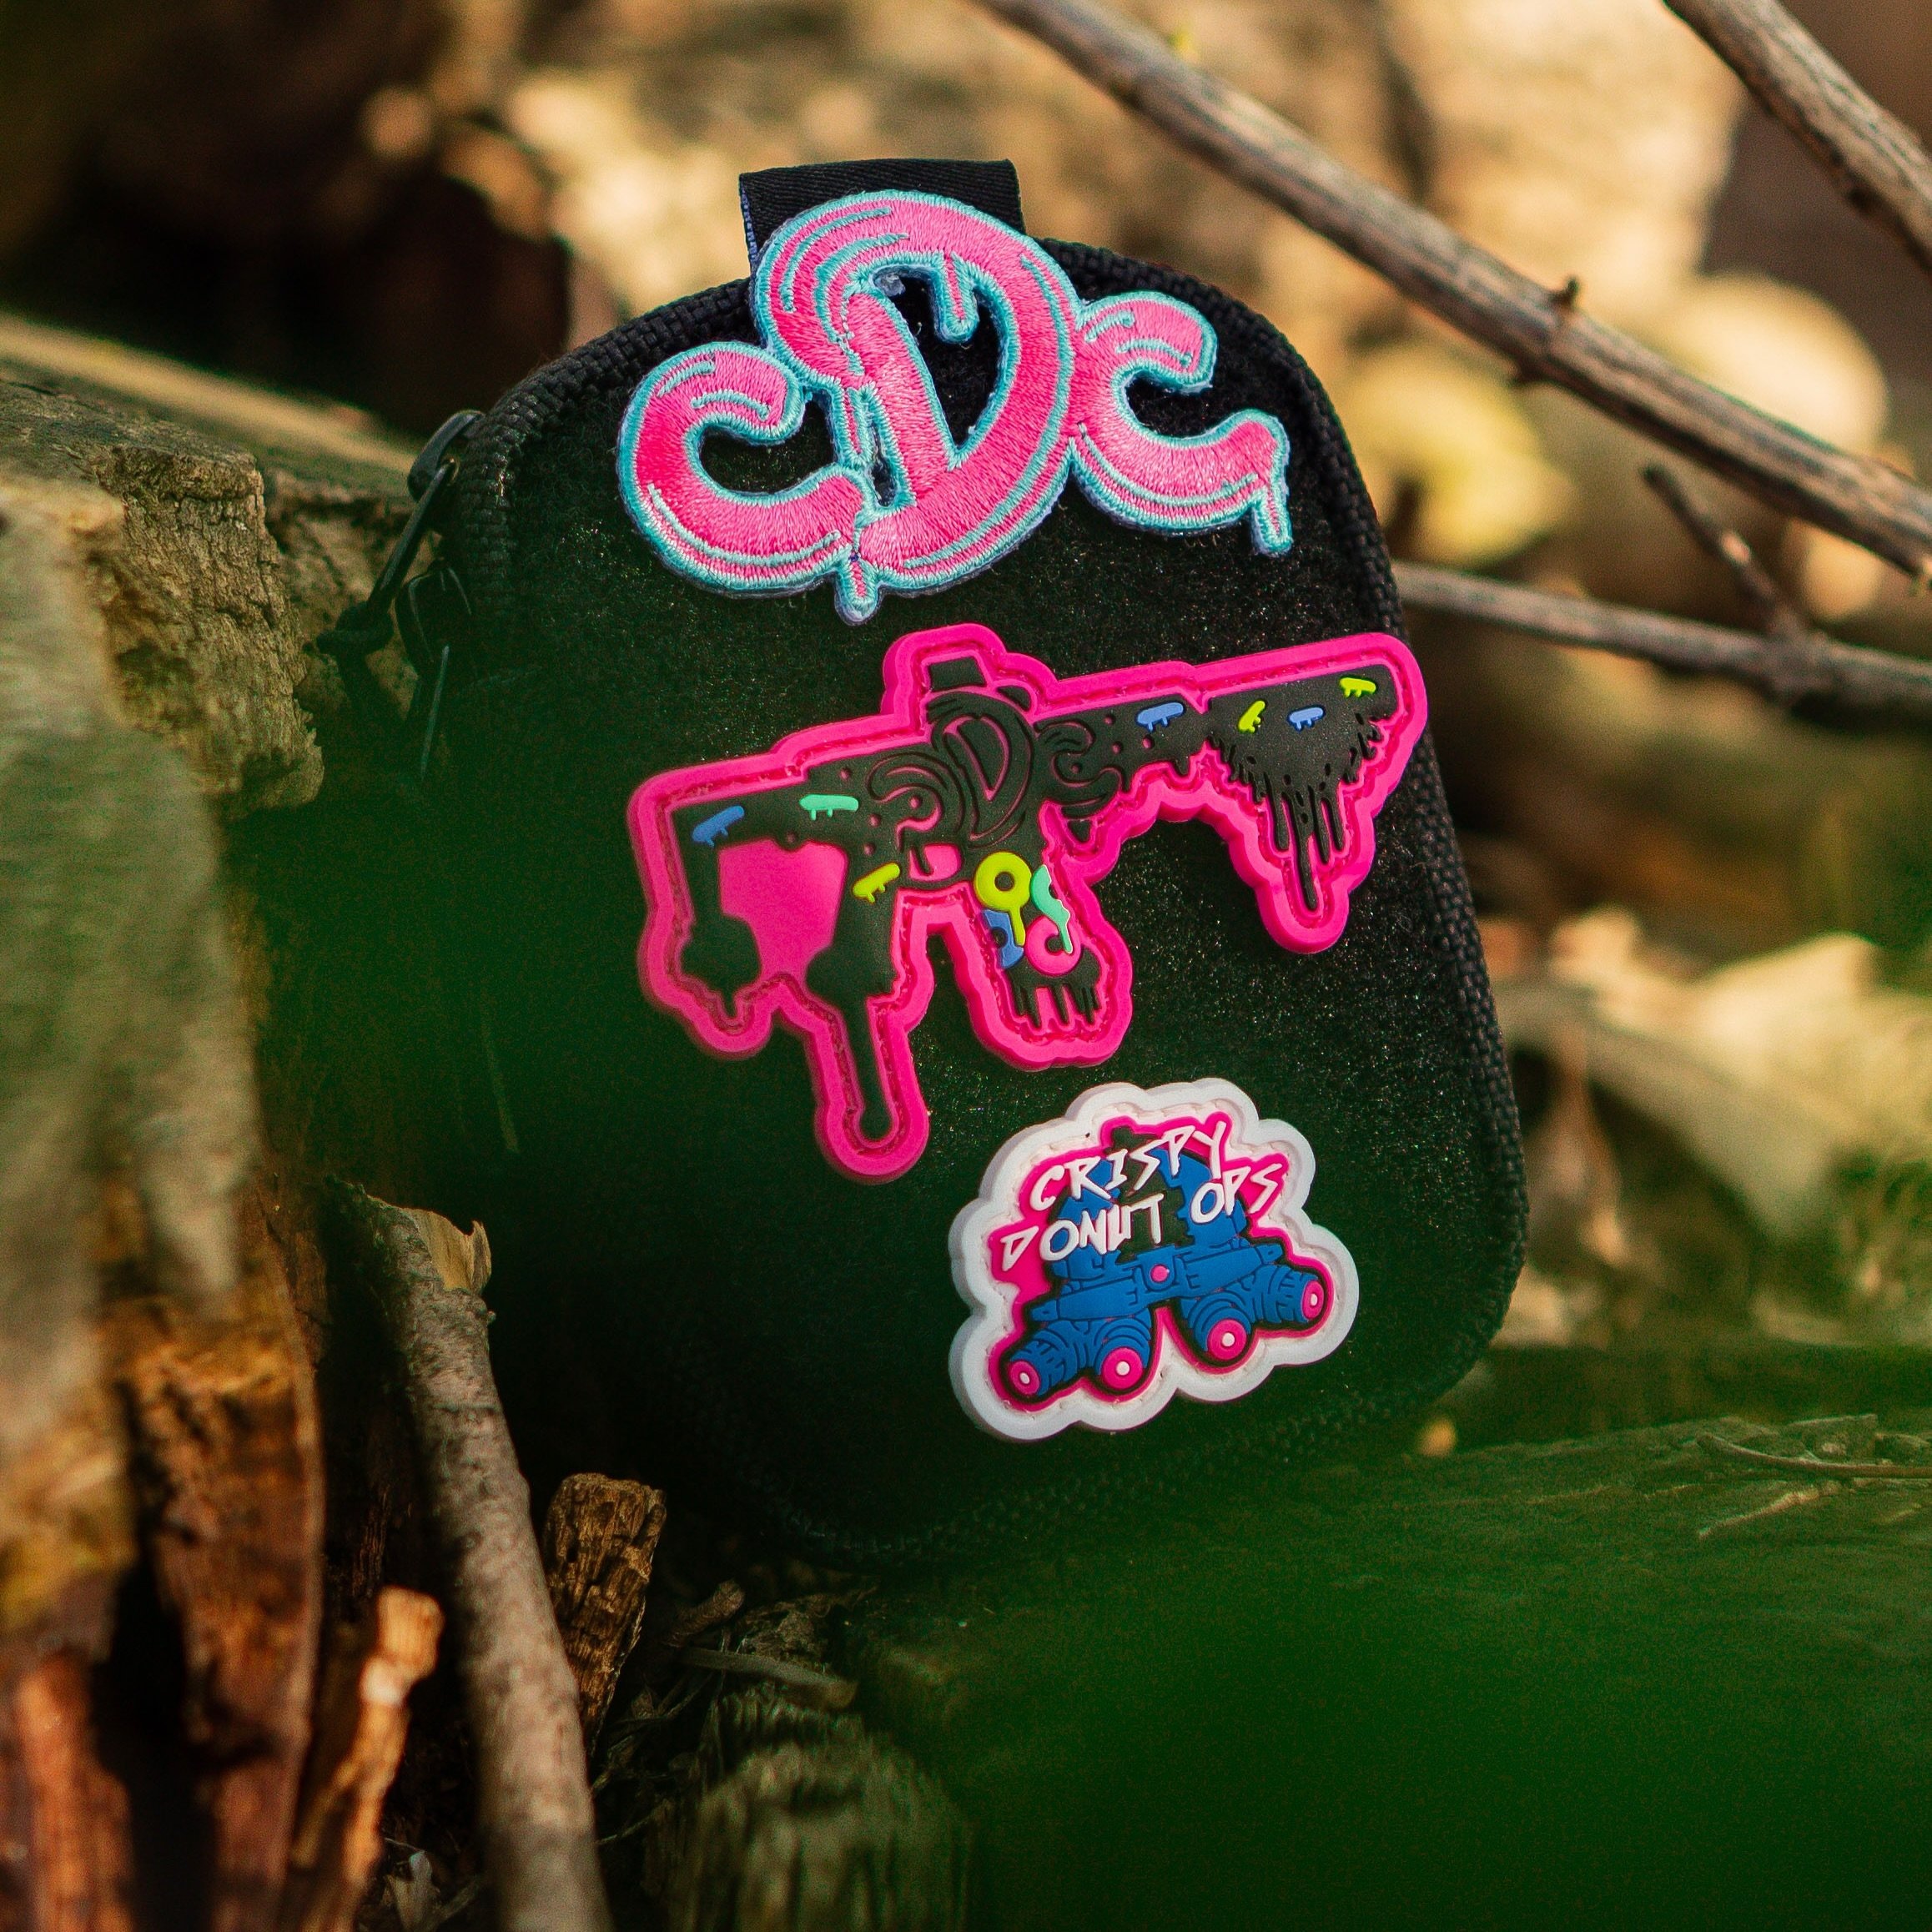 Explore the magic of life. Go on an adventure. 

www.DONUTKNIFE.com

#patch #patchgame #edc #cdc #cdcedc #essential #fun #jvke #classy #gear #vip #exclusive #sweet #club #donuts #explore #outside #adventure 

Photo Credit: @barbarianbraunny